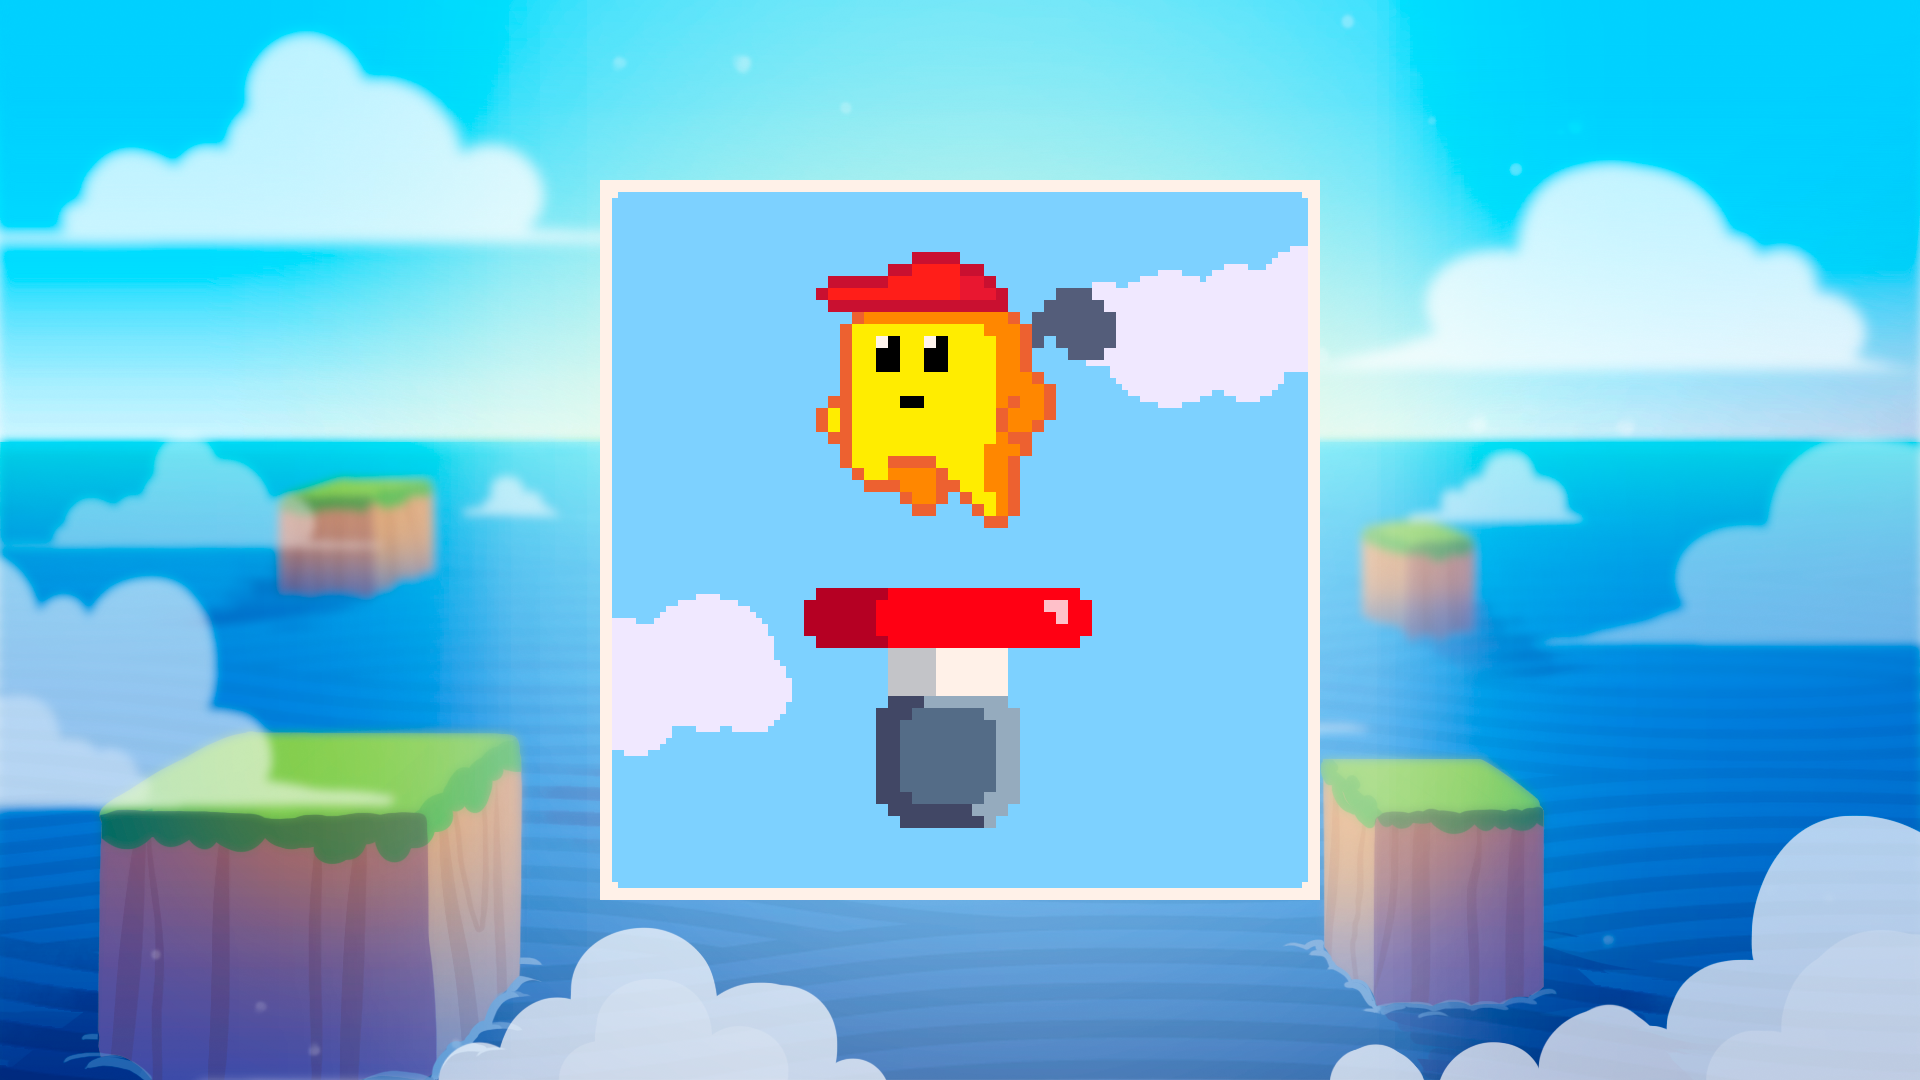 Icon for Jumping high